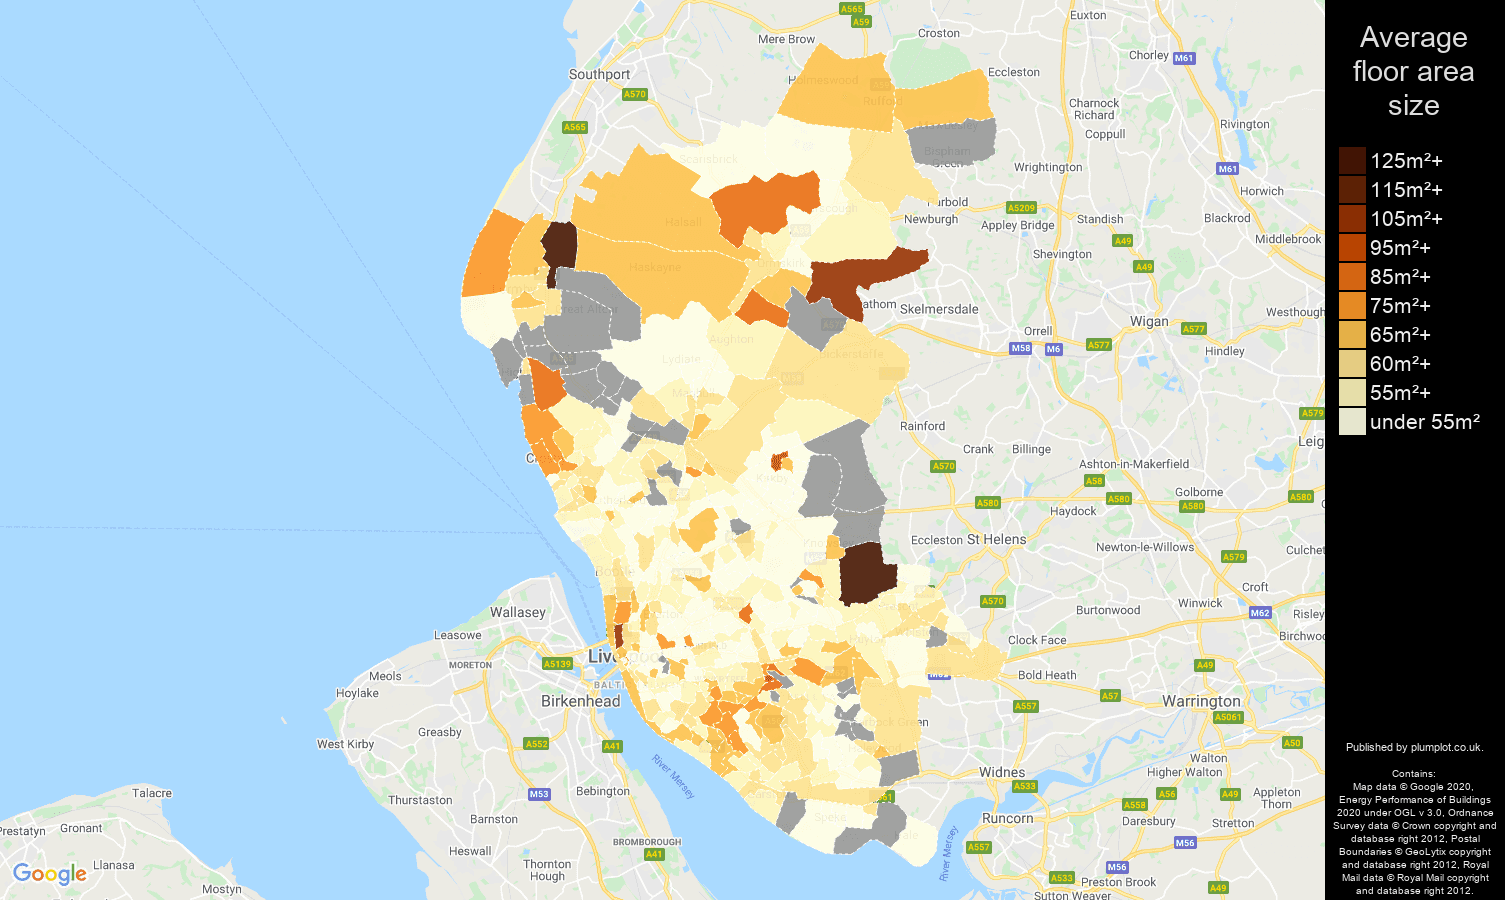 Liverpool map of average floor area size of flats